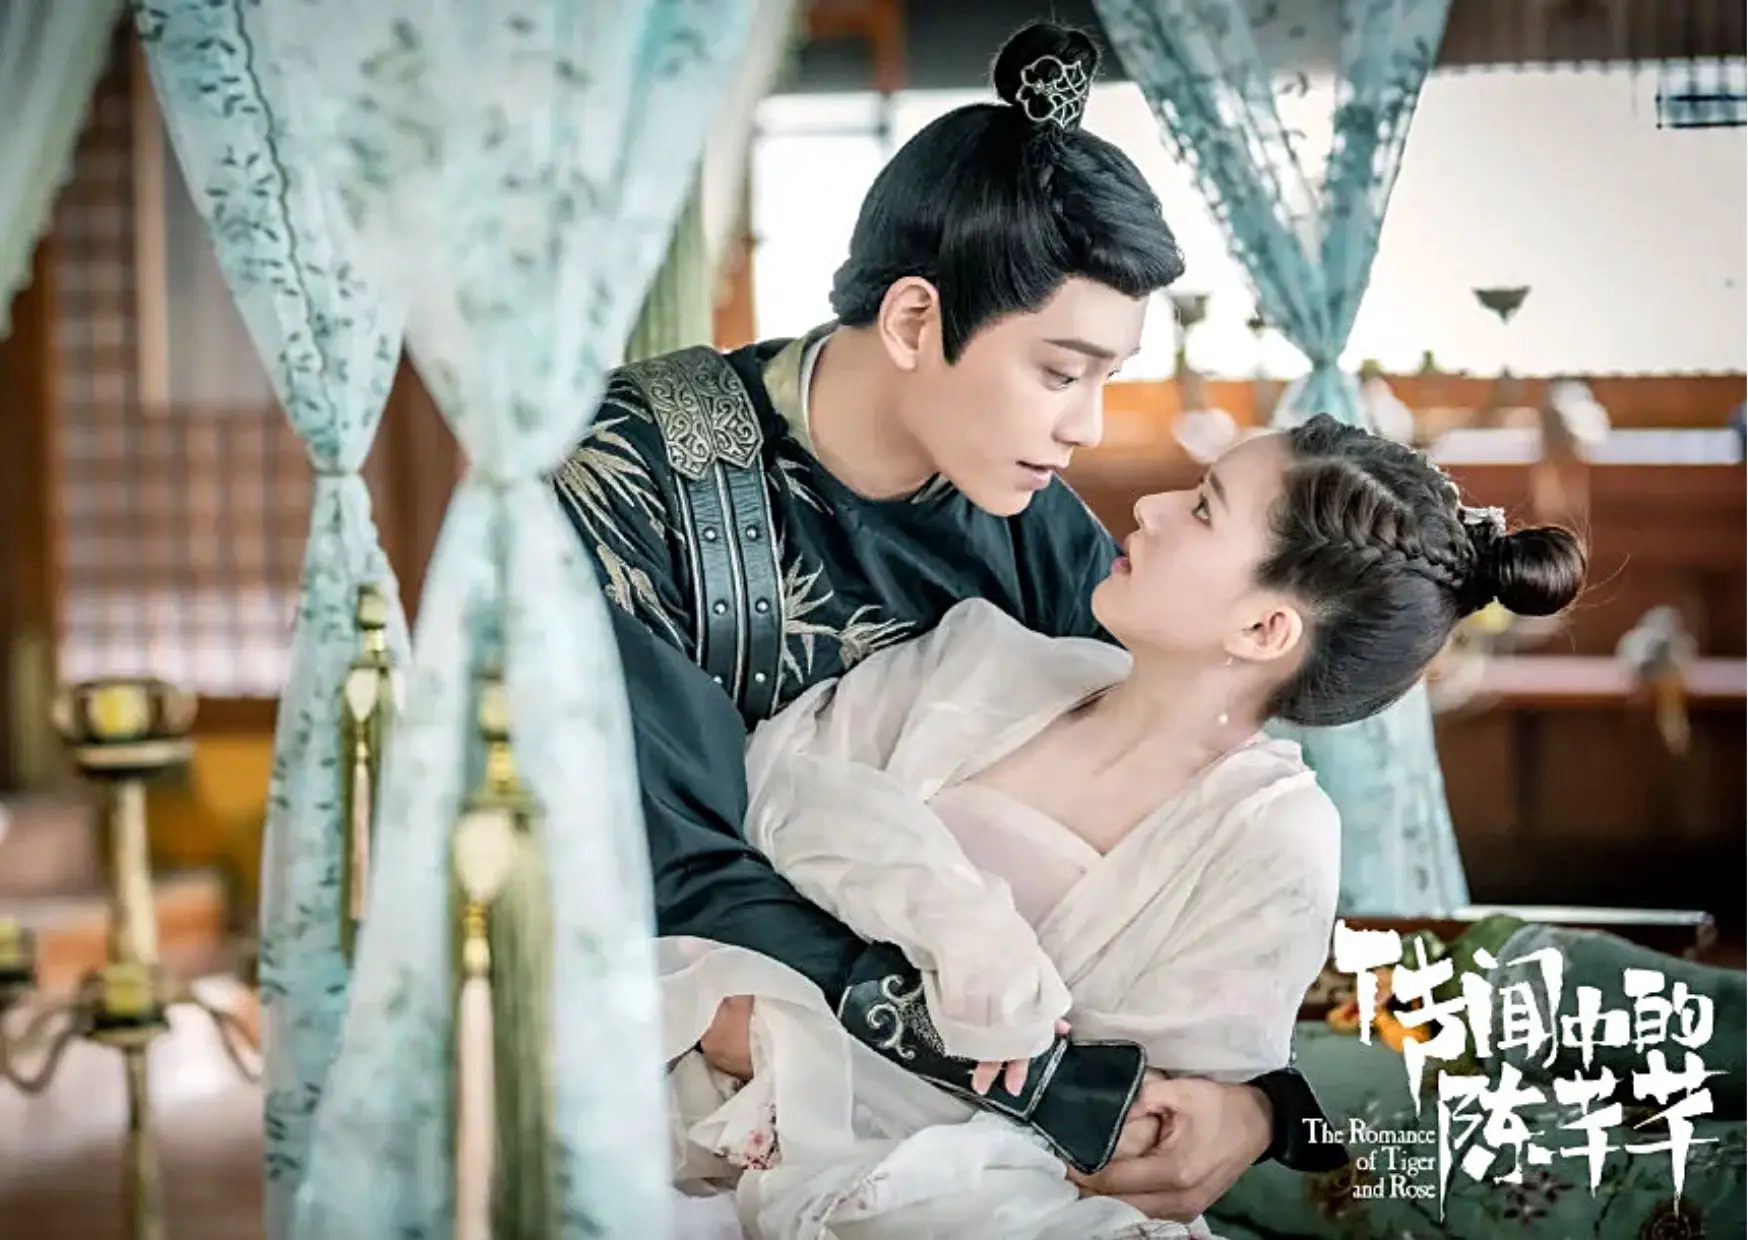 C-Drama Review: "The Romance Of Tiger And Rose" Proves That Love Can Defy  Equality And Power - kdramadiary